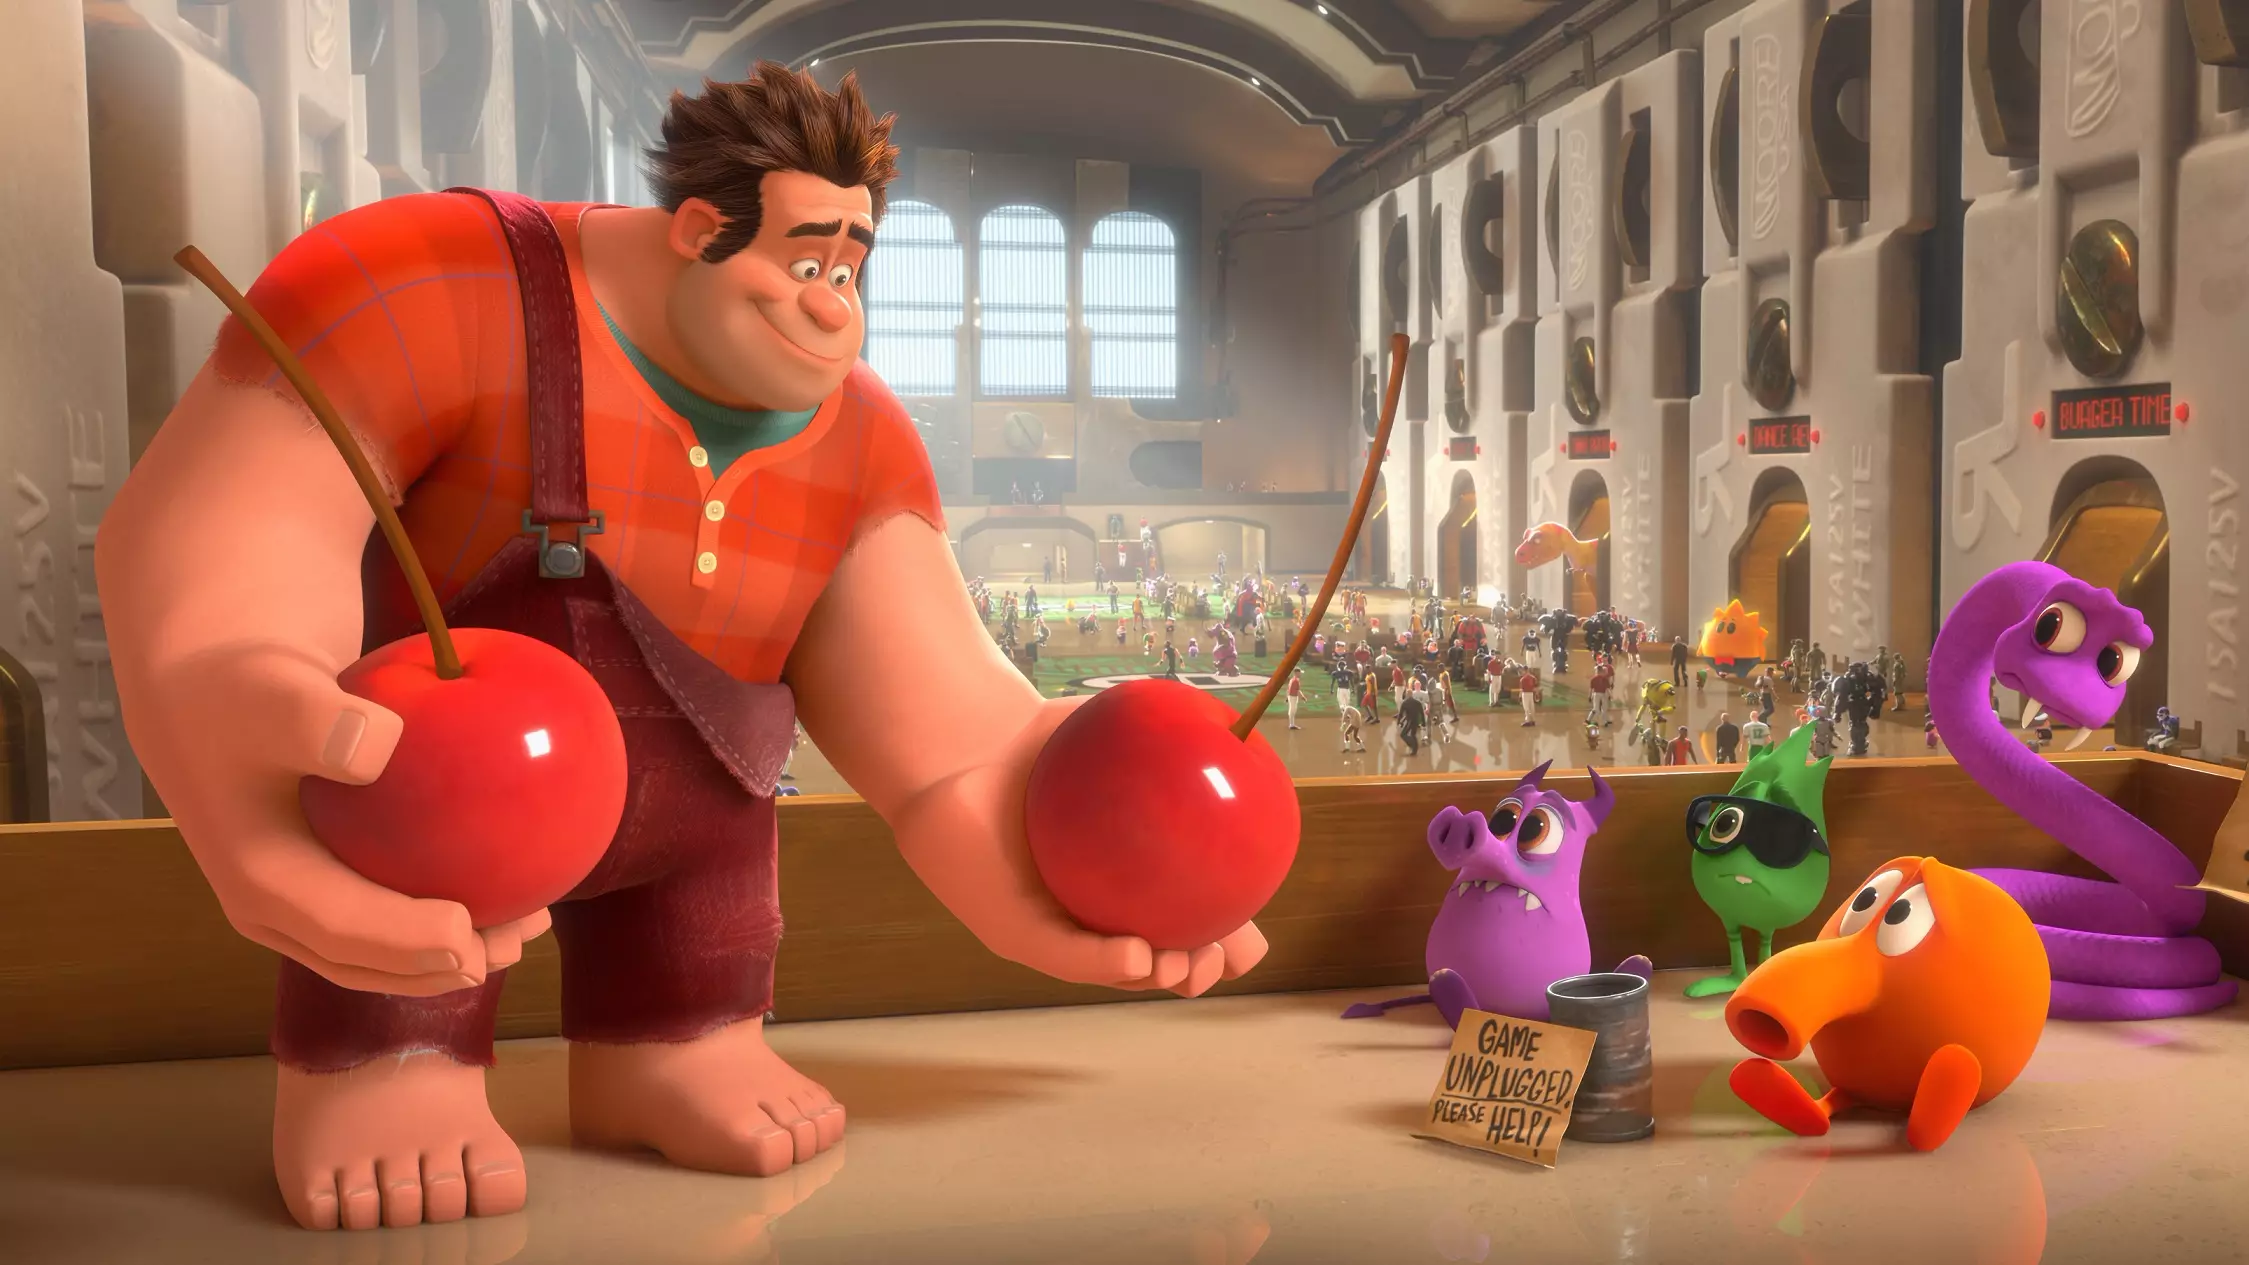 Disney Released A New Year-Themed Teaser For 'Wreck-It Ralph 2' 